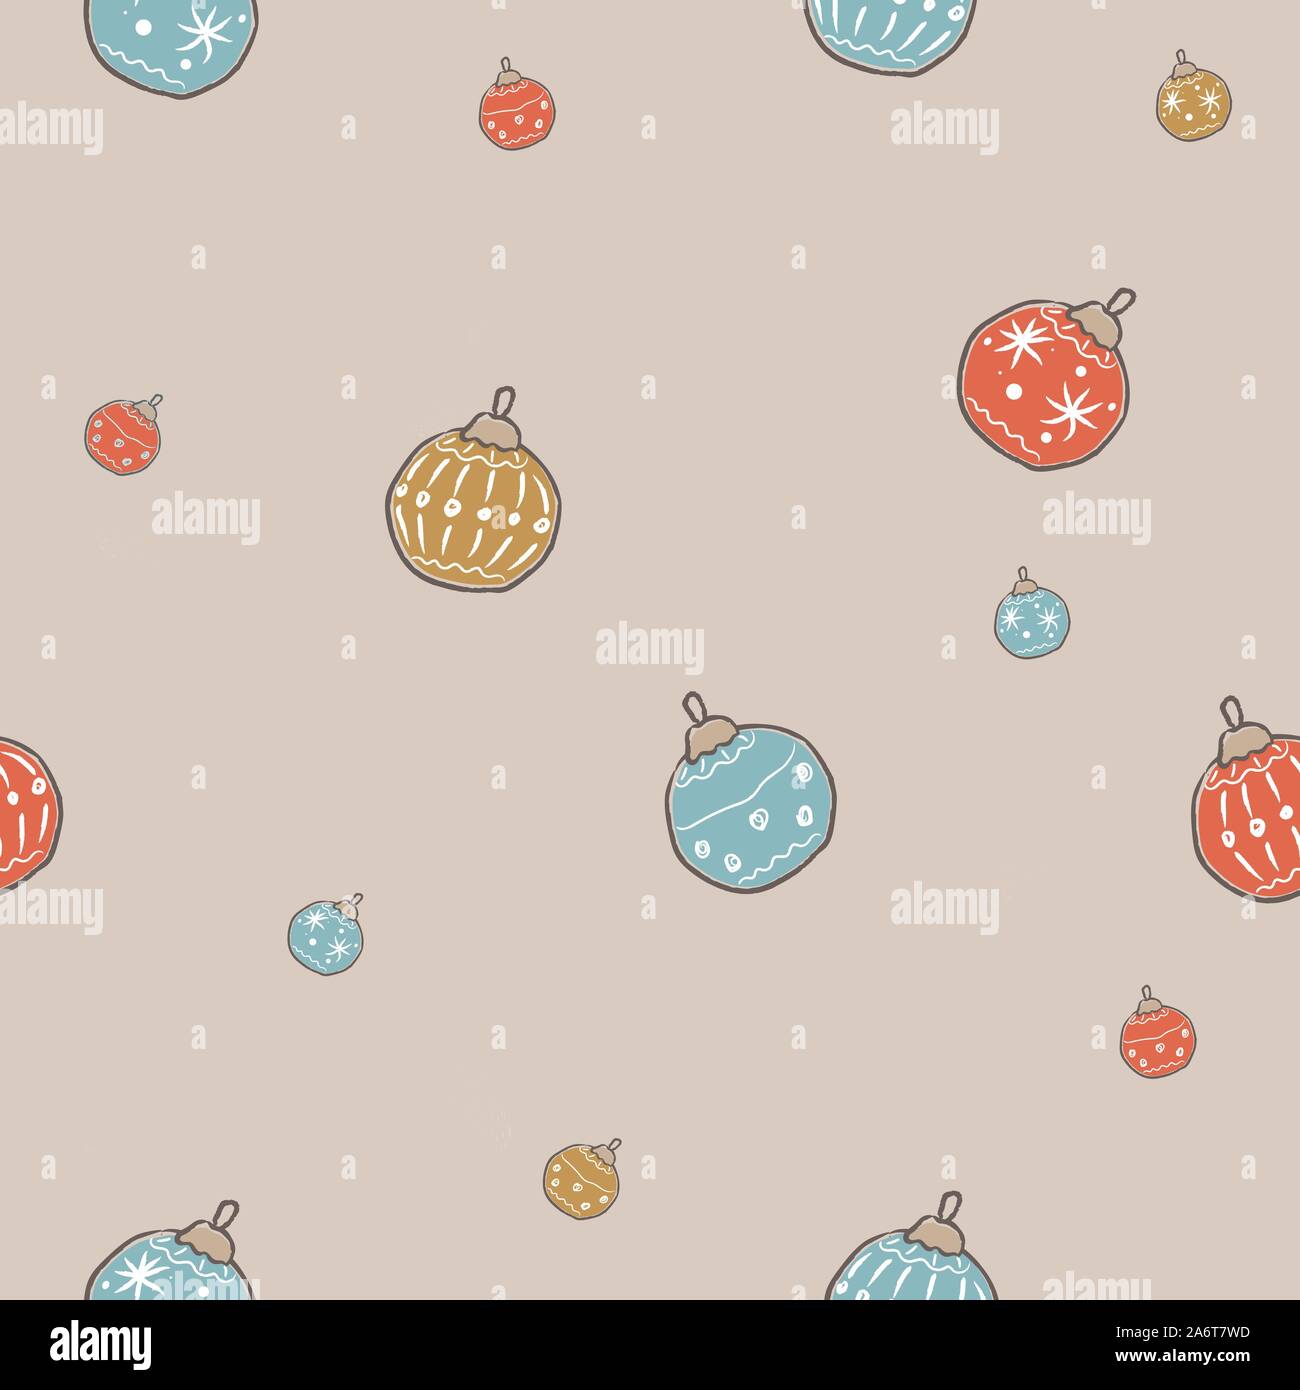 Winter Seamless Pattern with festive ornaments on subtle background. Great For swatches, fabric, wrapping/gift paper, wall art design, etc. Vector Ill Stock Vector